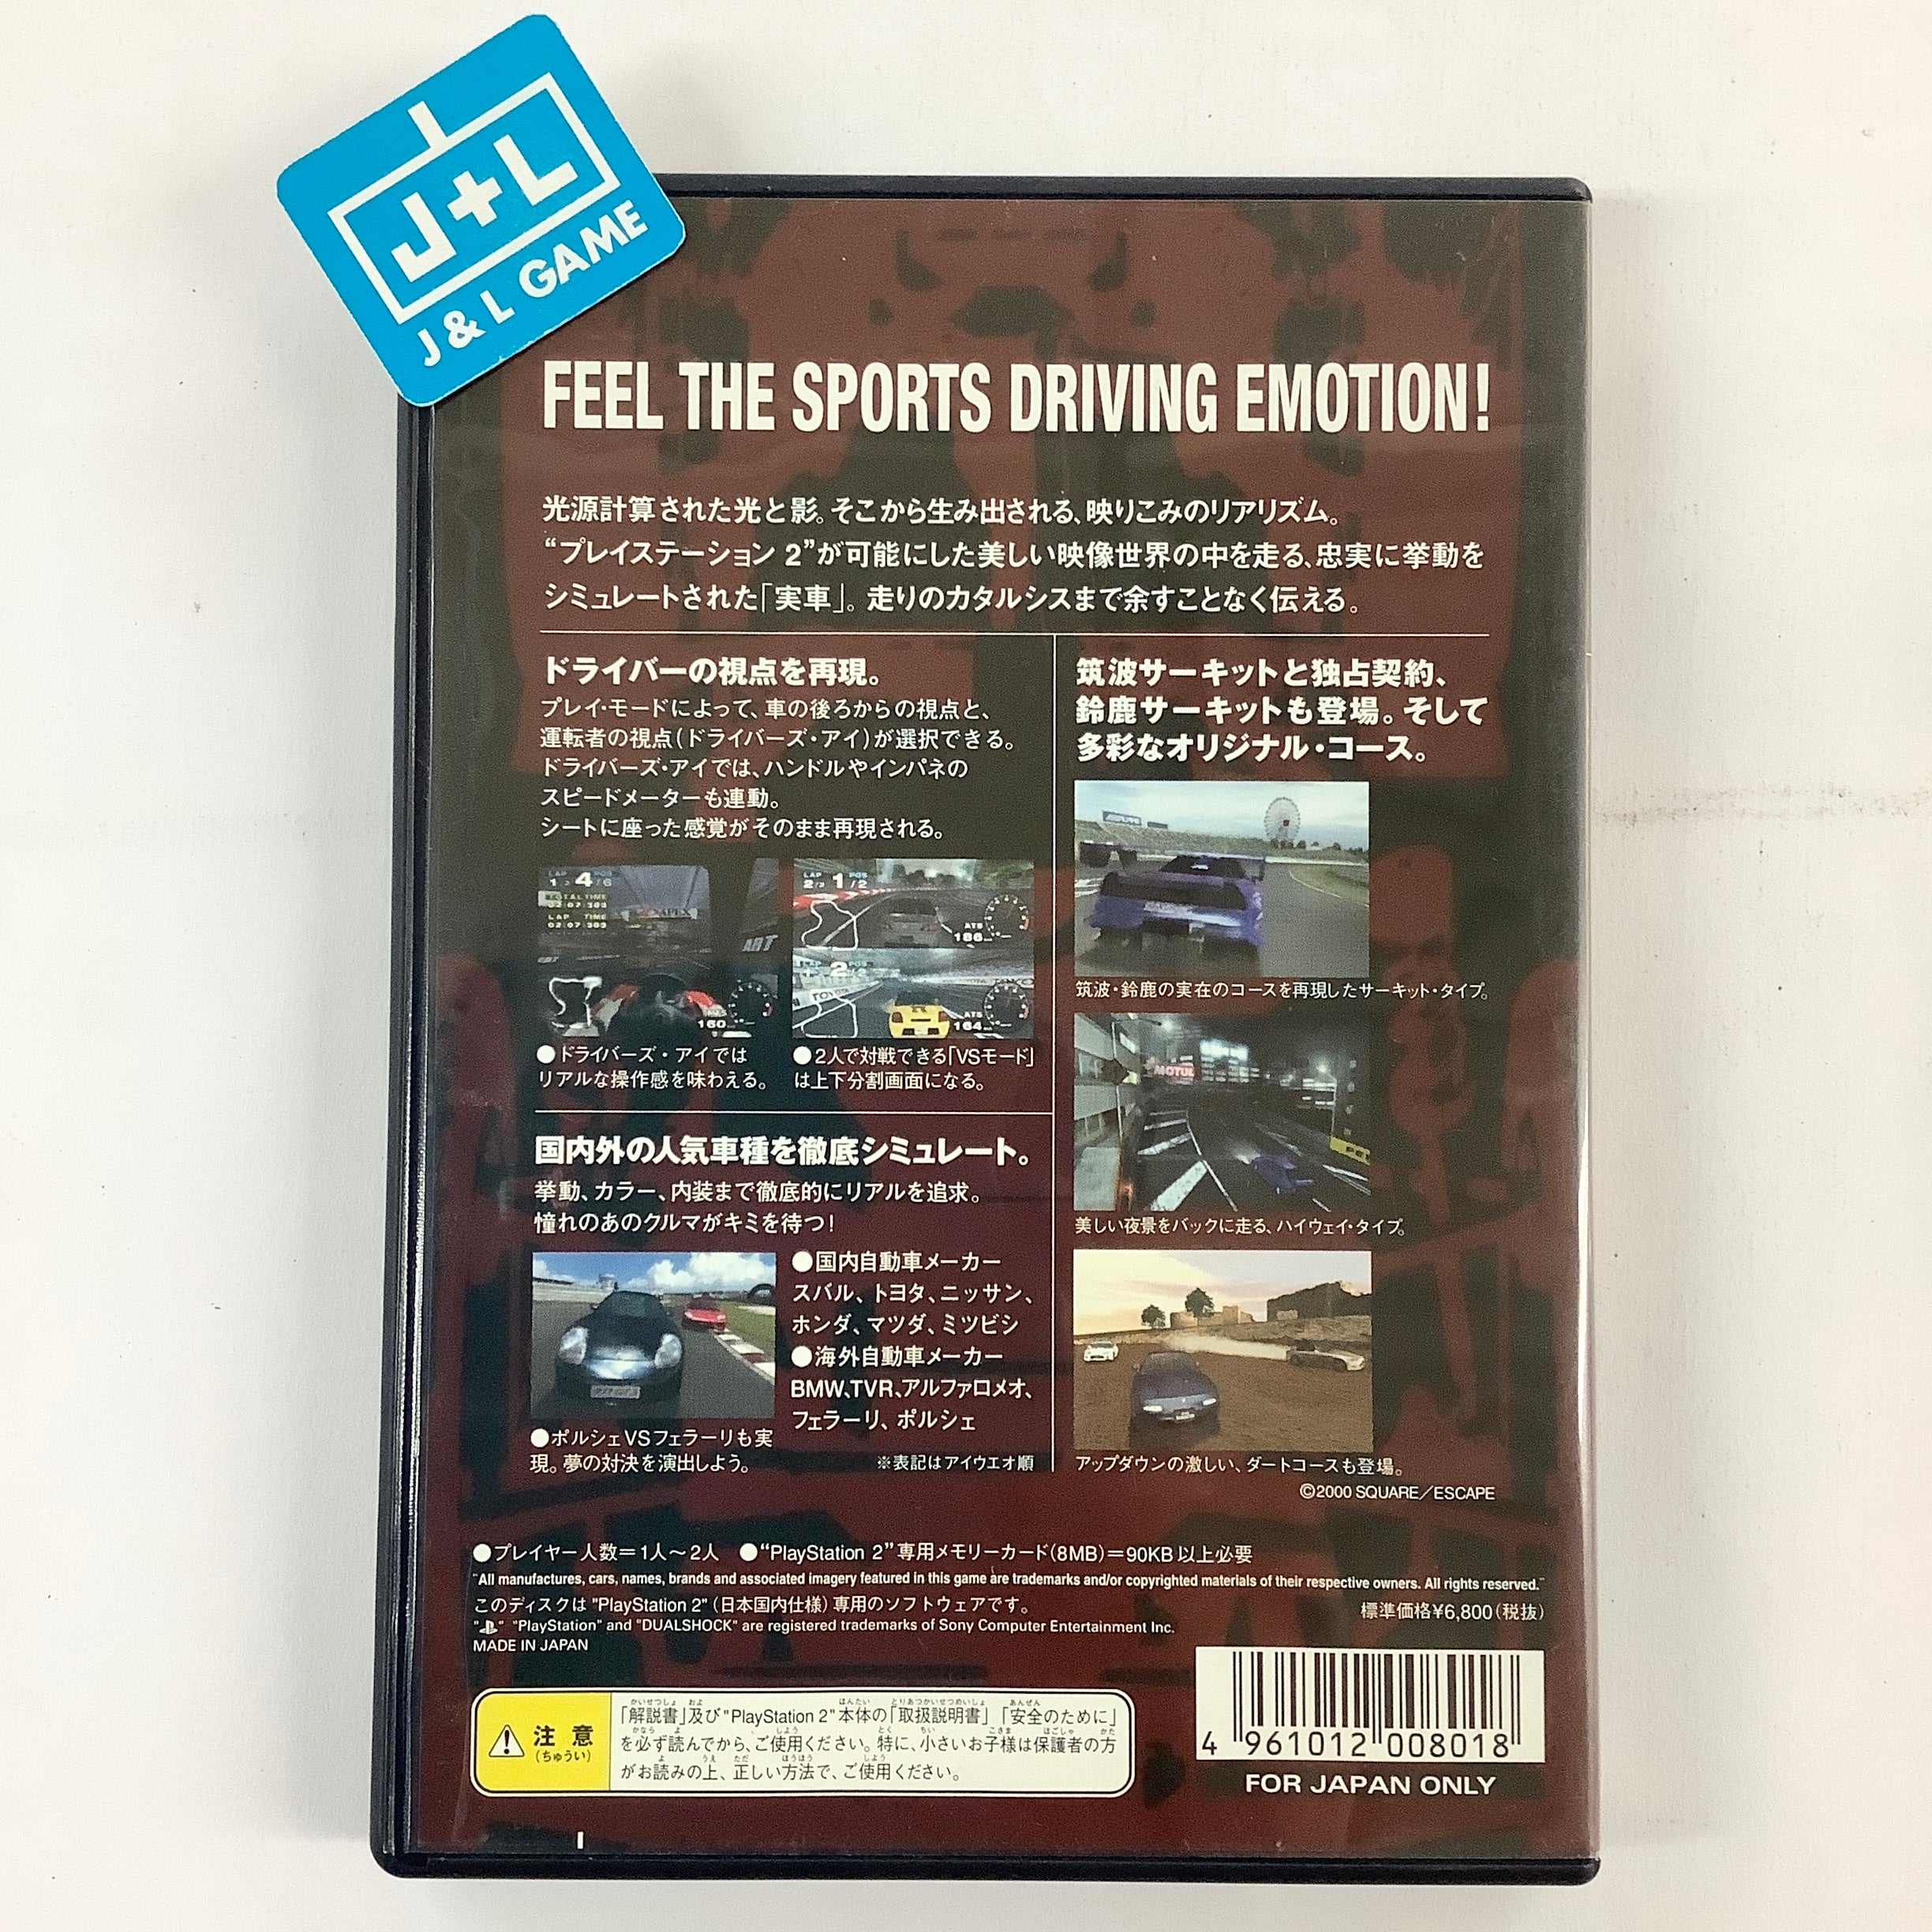 Driving Emotion Type-S - (PS2) PlayStation 2 [Pre-Owned] (Japanese Import) Video Games SquareSoft   